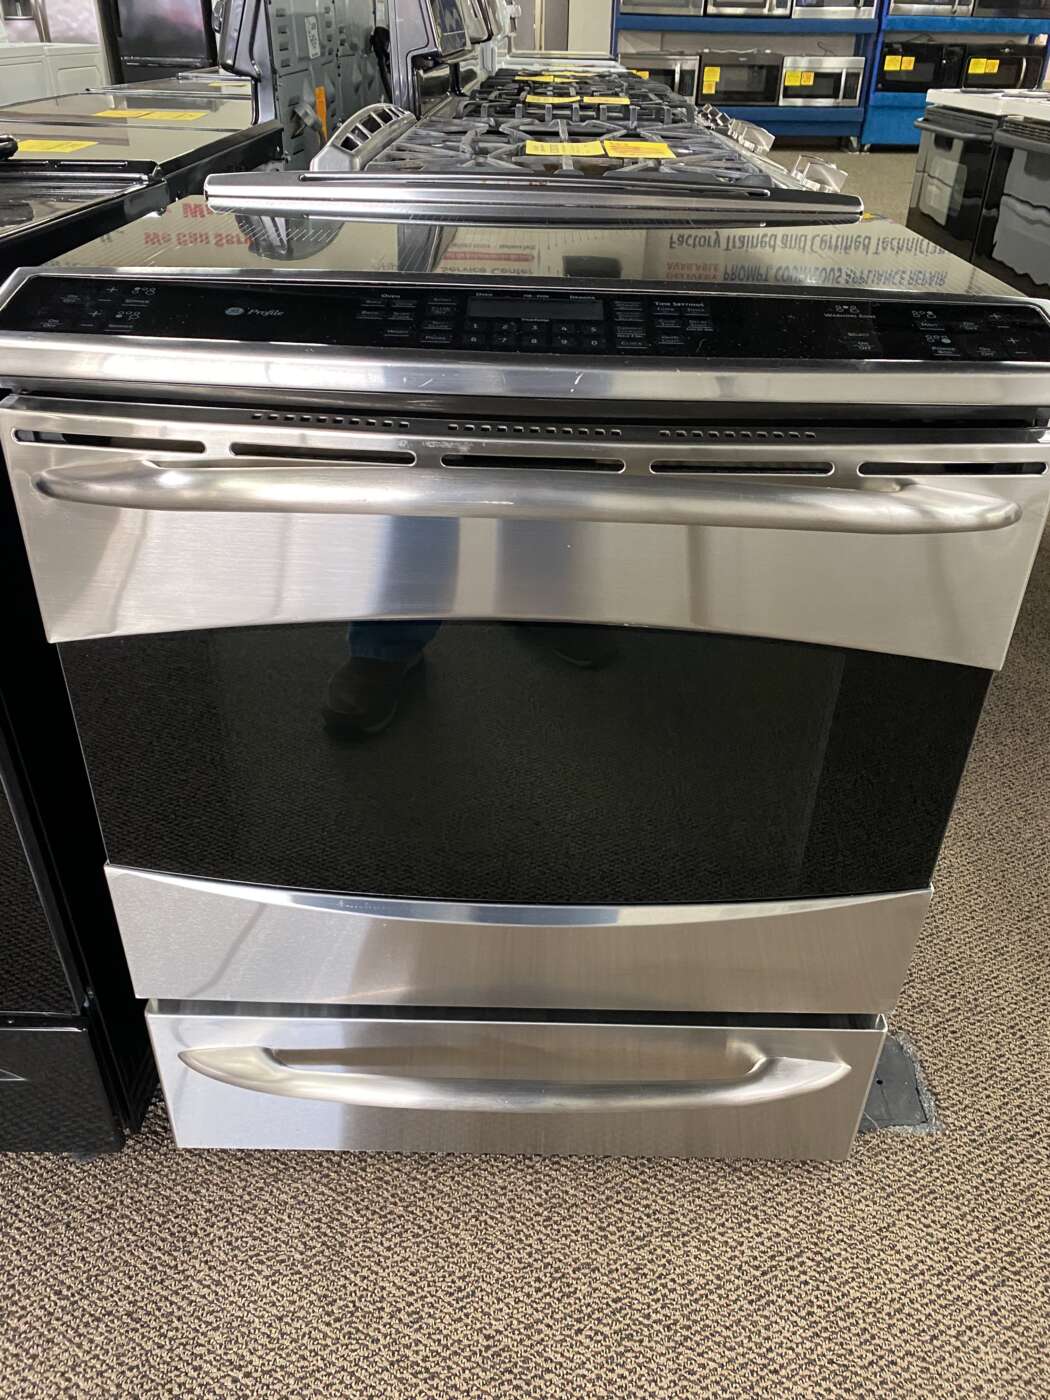 Reconditioned G/E Self-Clean Convection-Oven Induction-Cooktop Slide-In Electric Range – Stainless